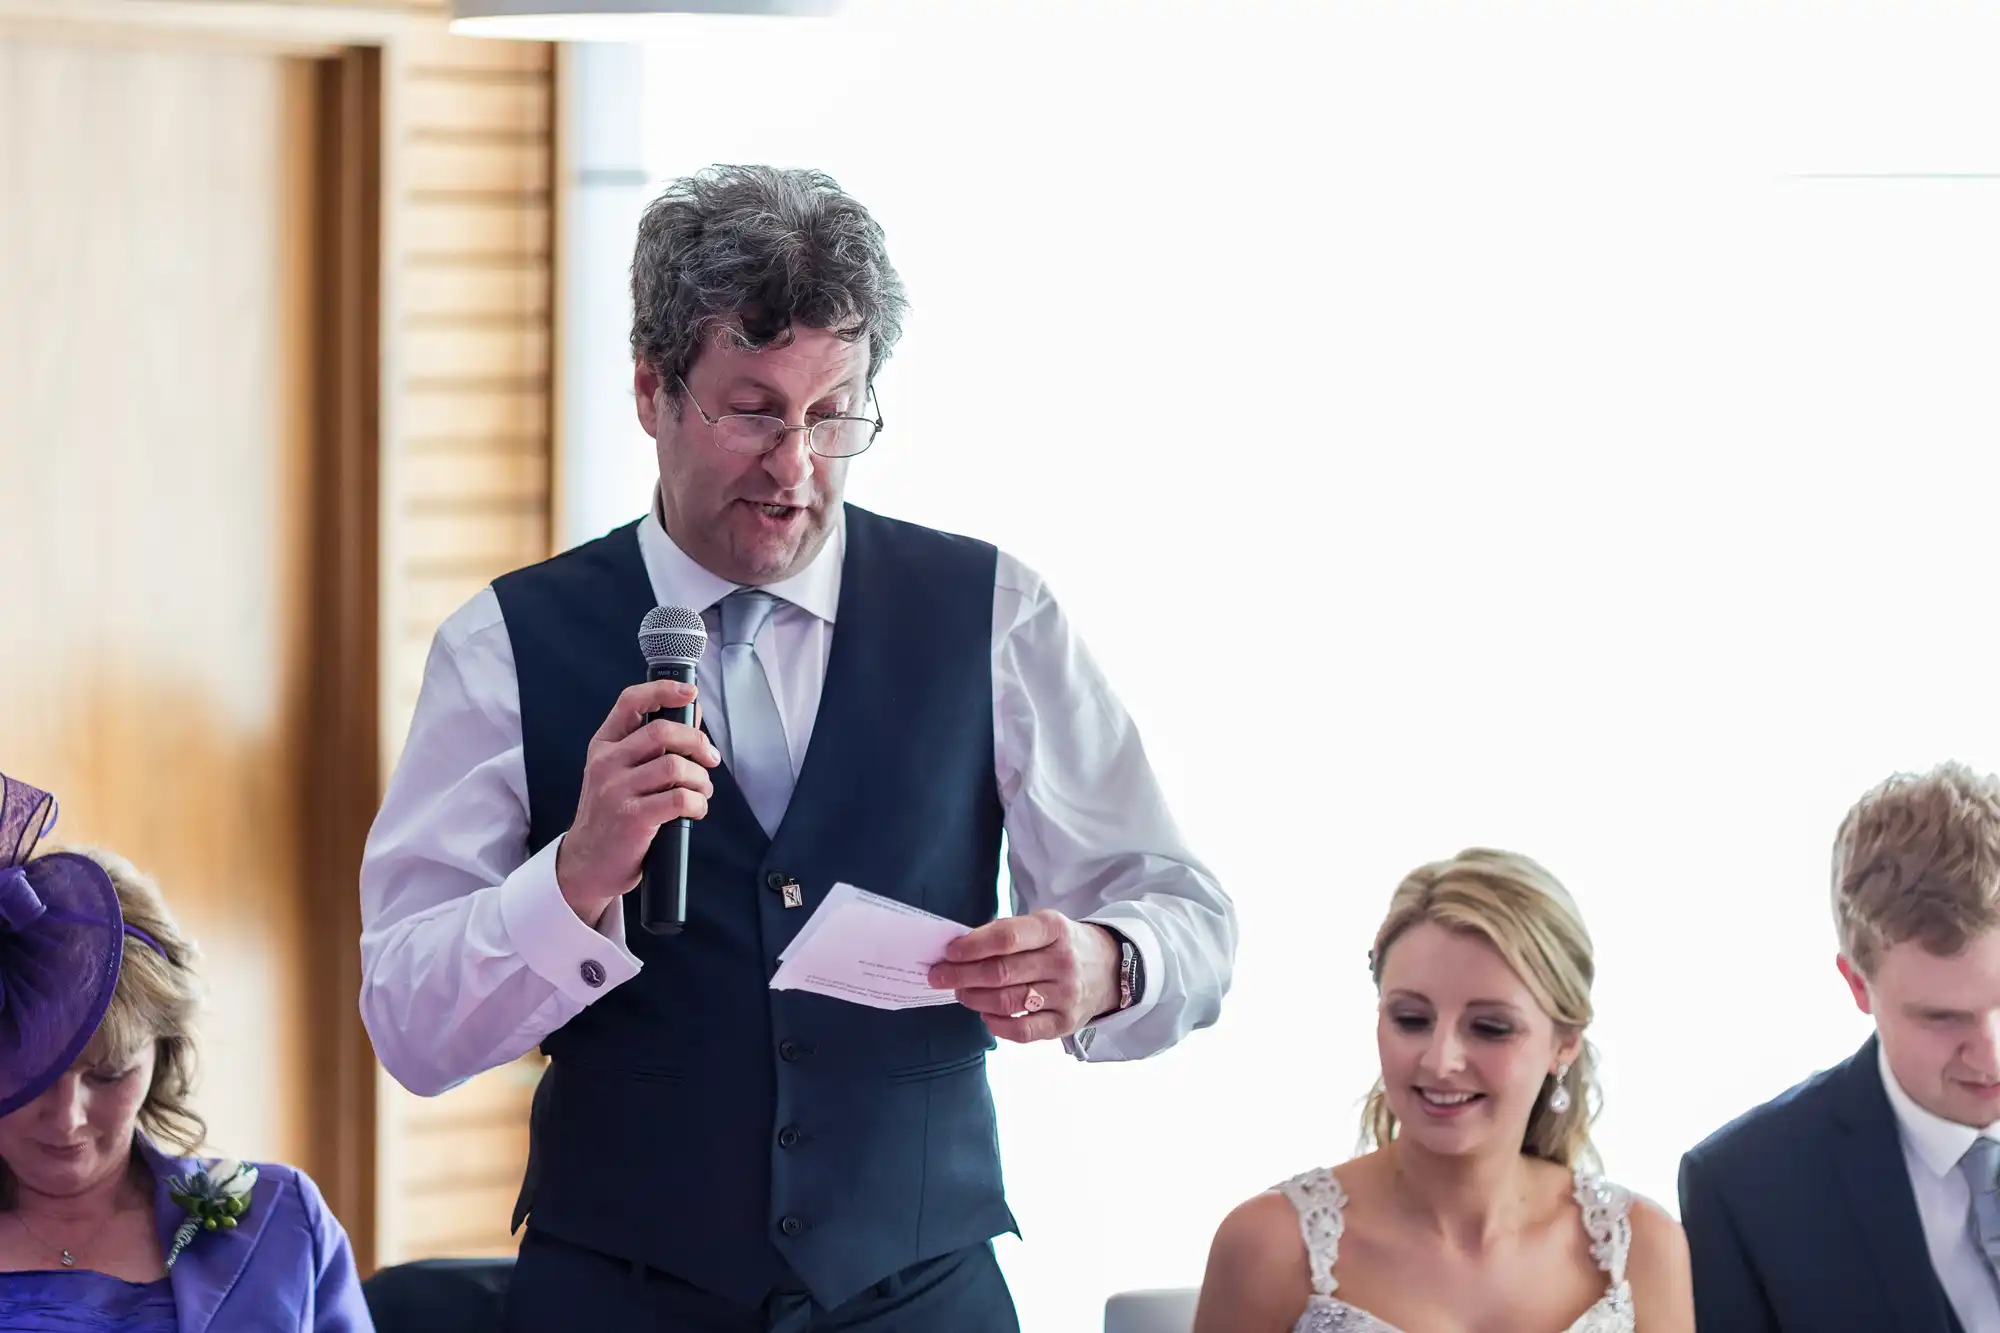 A man in a vest and tie delivers a speech with a microphone at a formal event, holding a paper, with seated guests listening attentively.